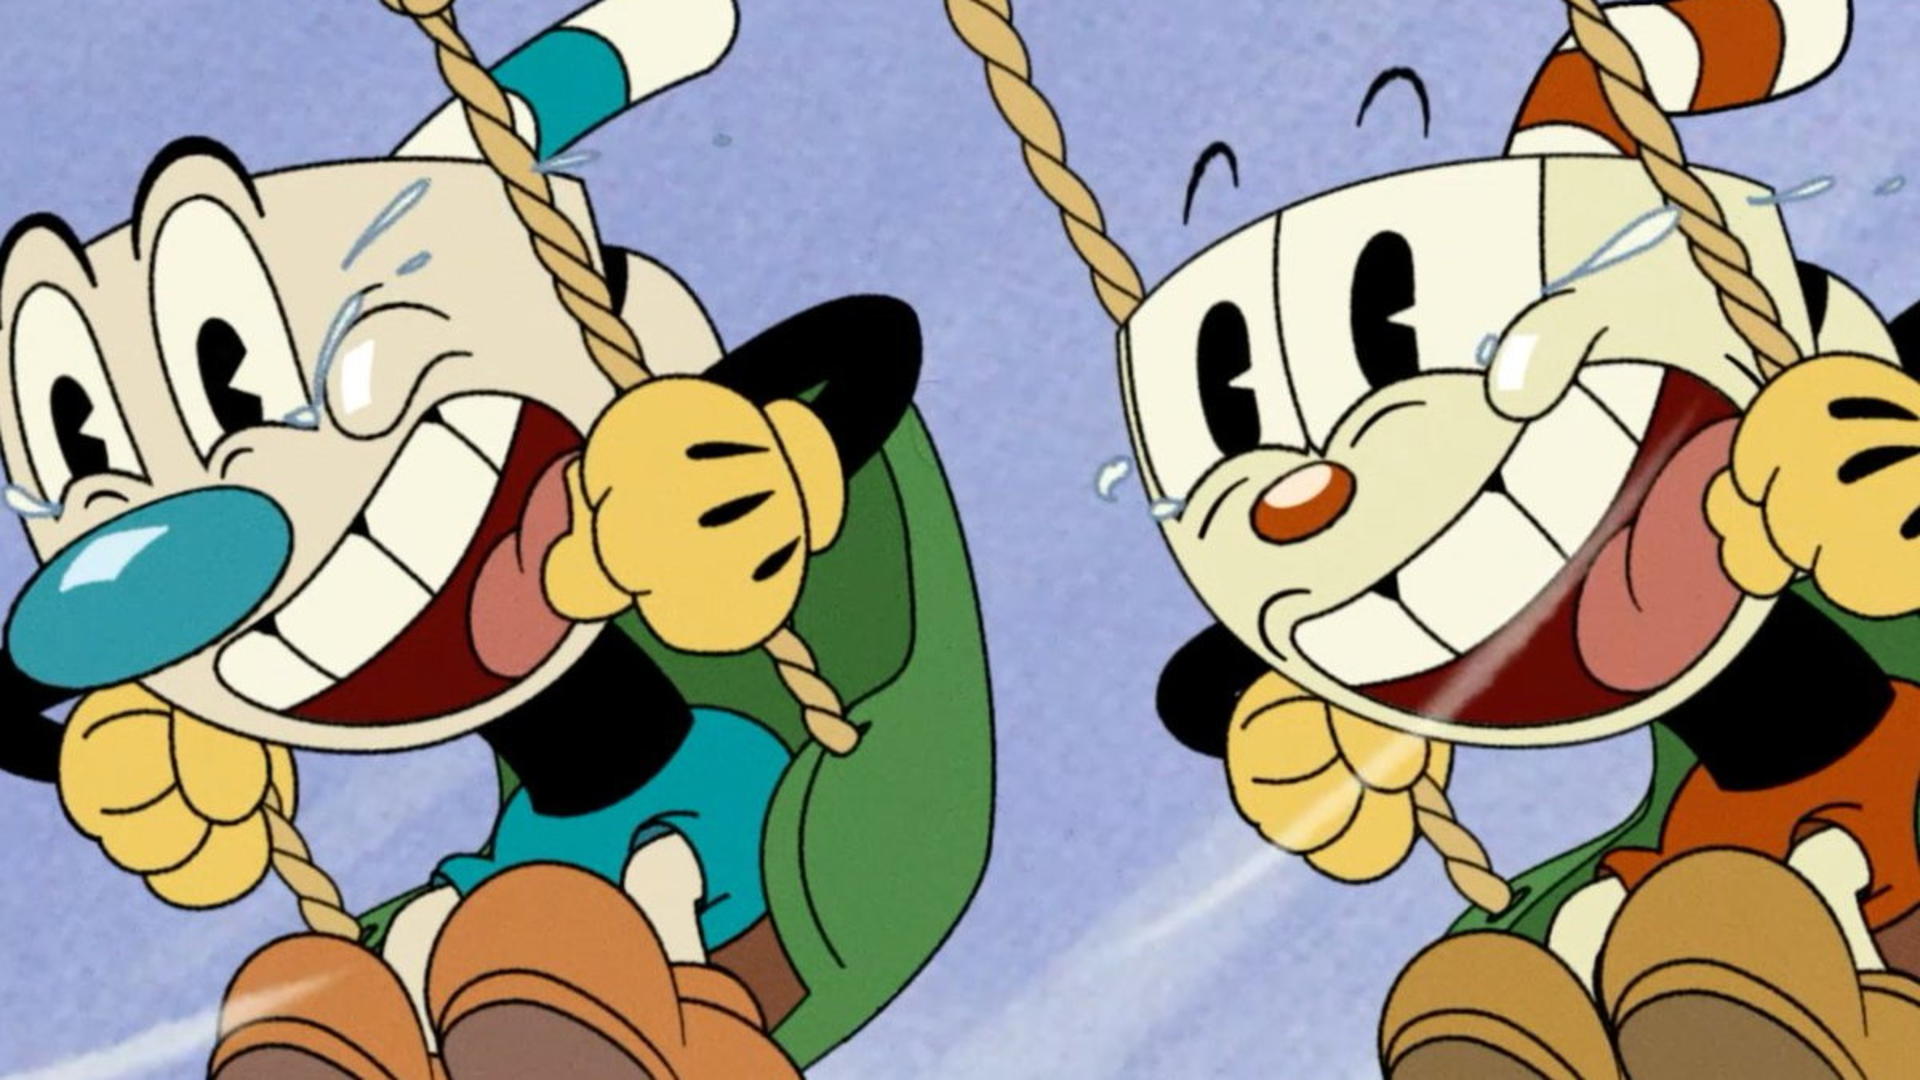 Here's a first look at Netflix's 'Cuphead' series